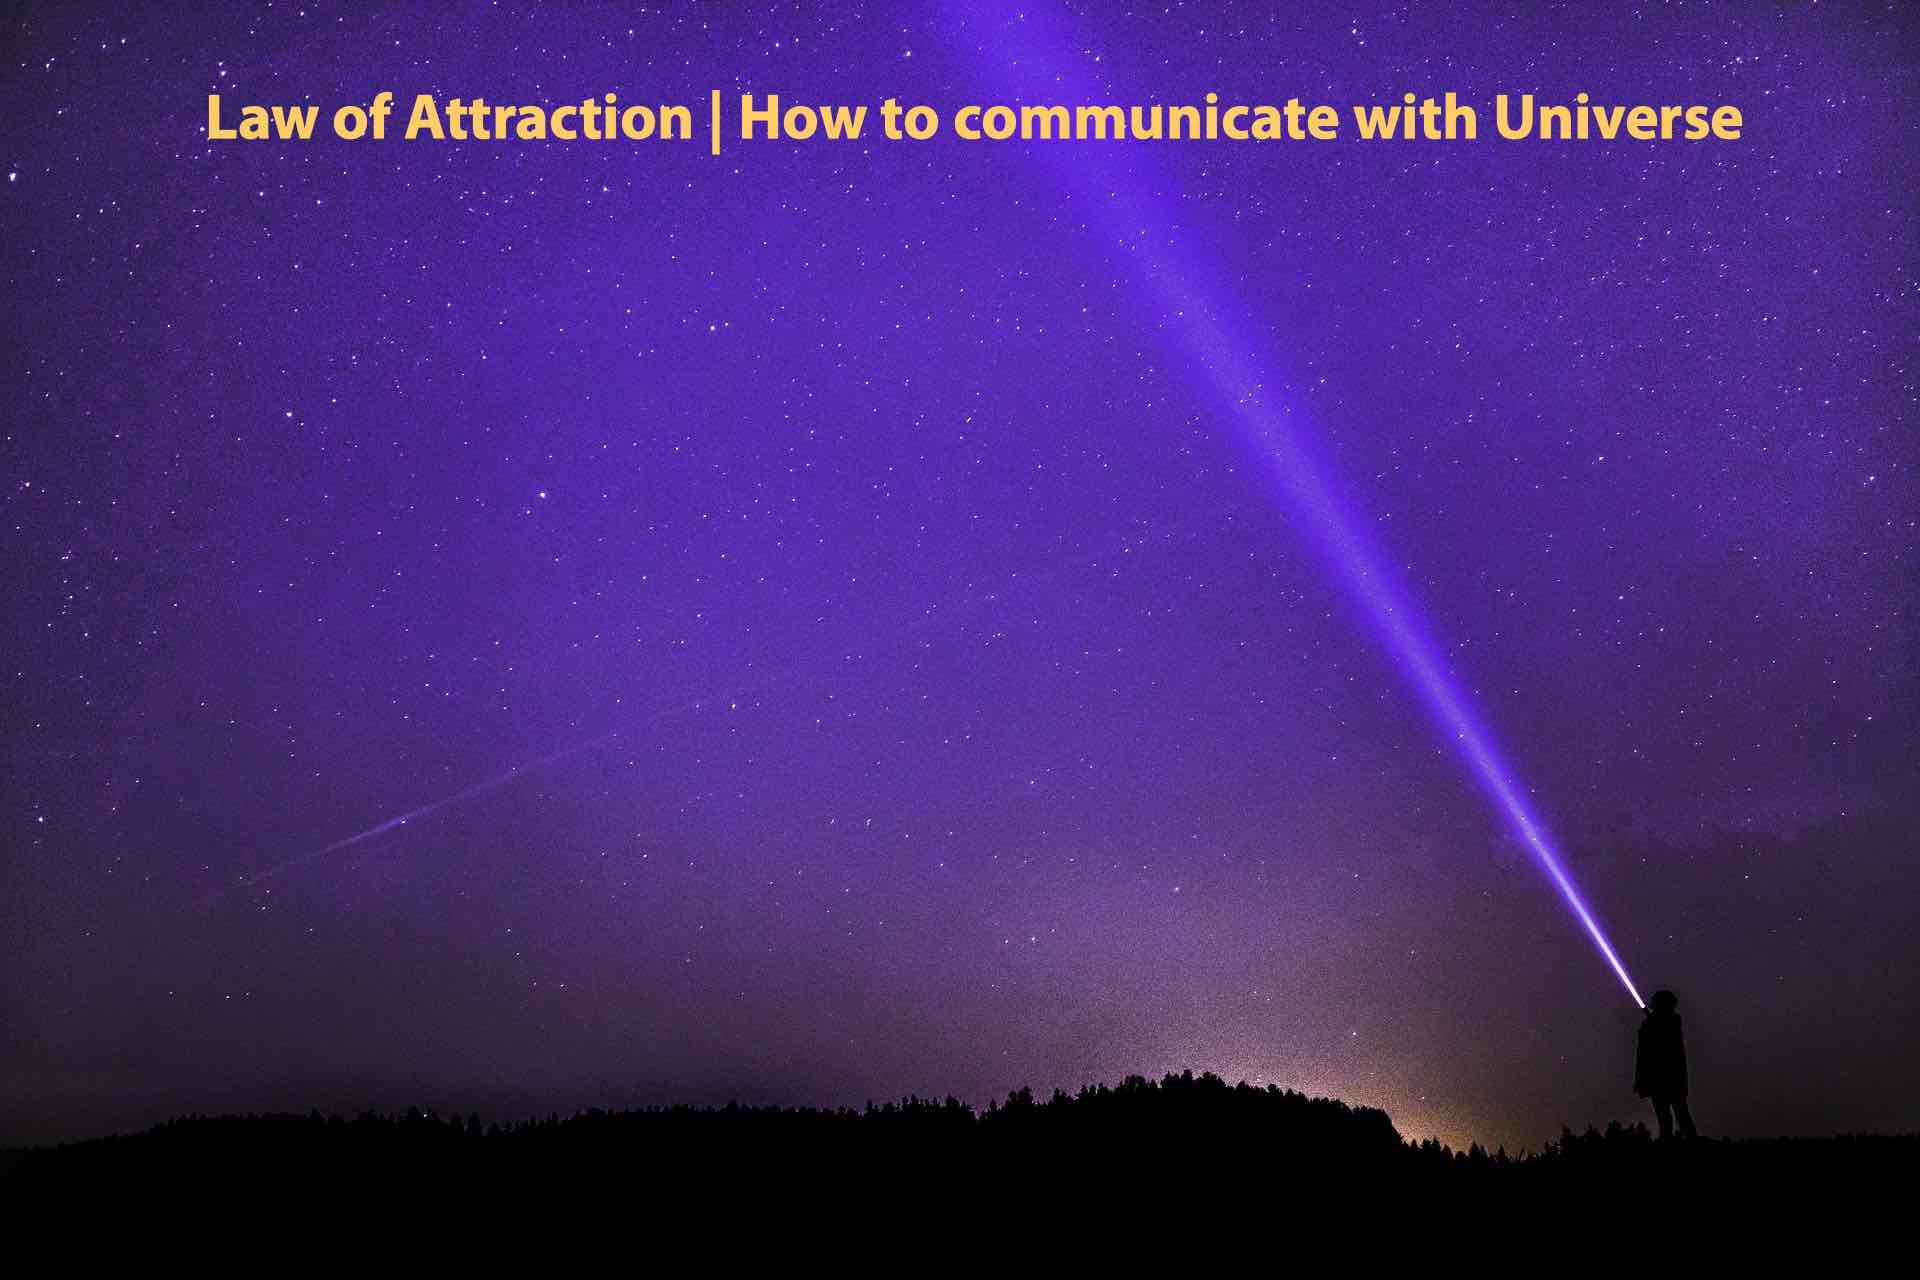 Law of attraction | How to communicate with universe